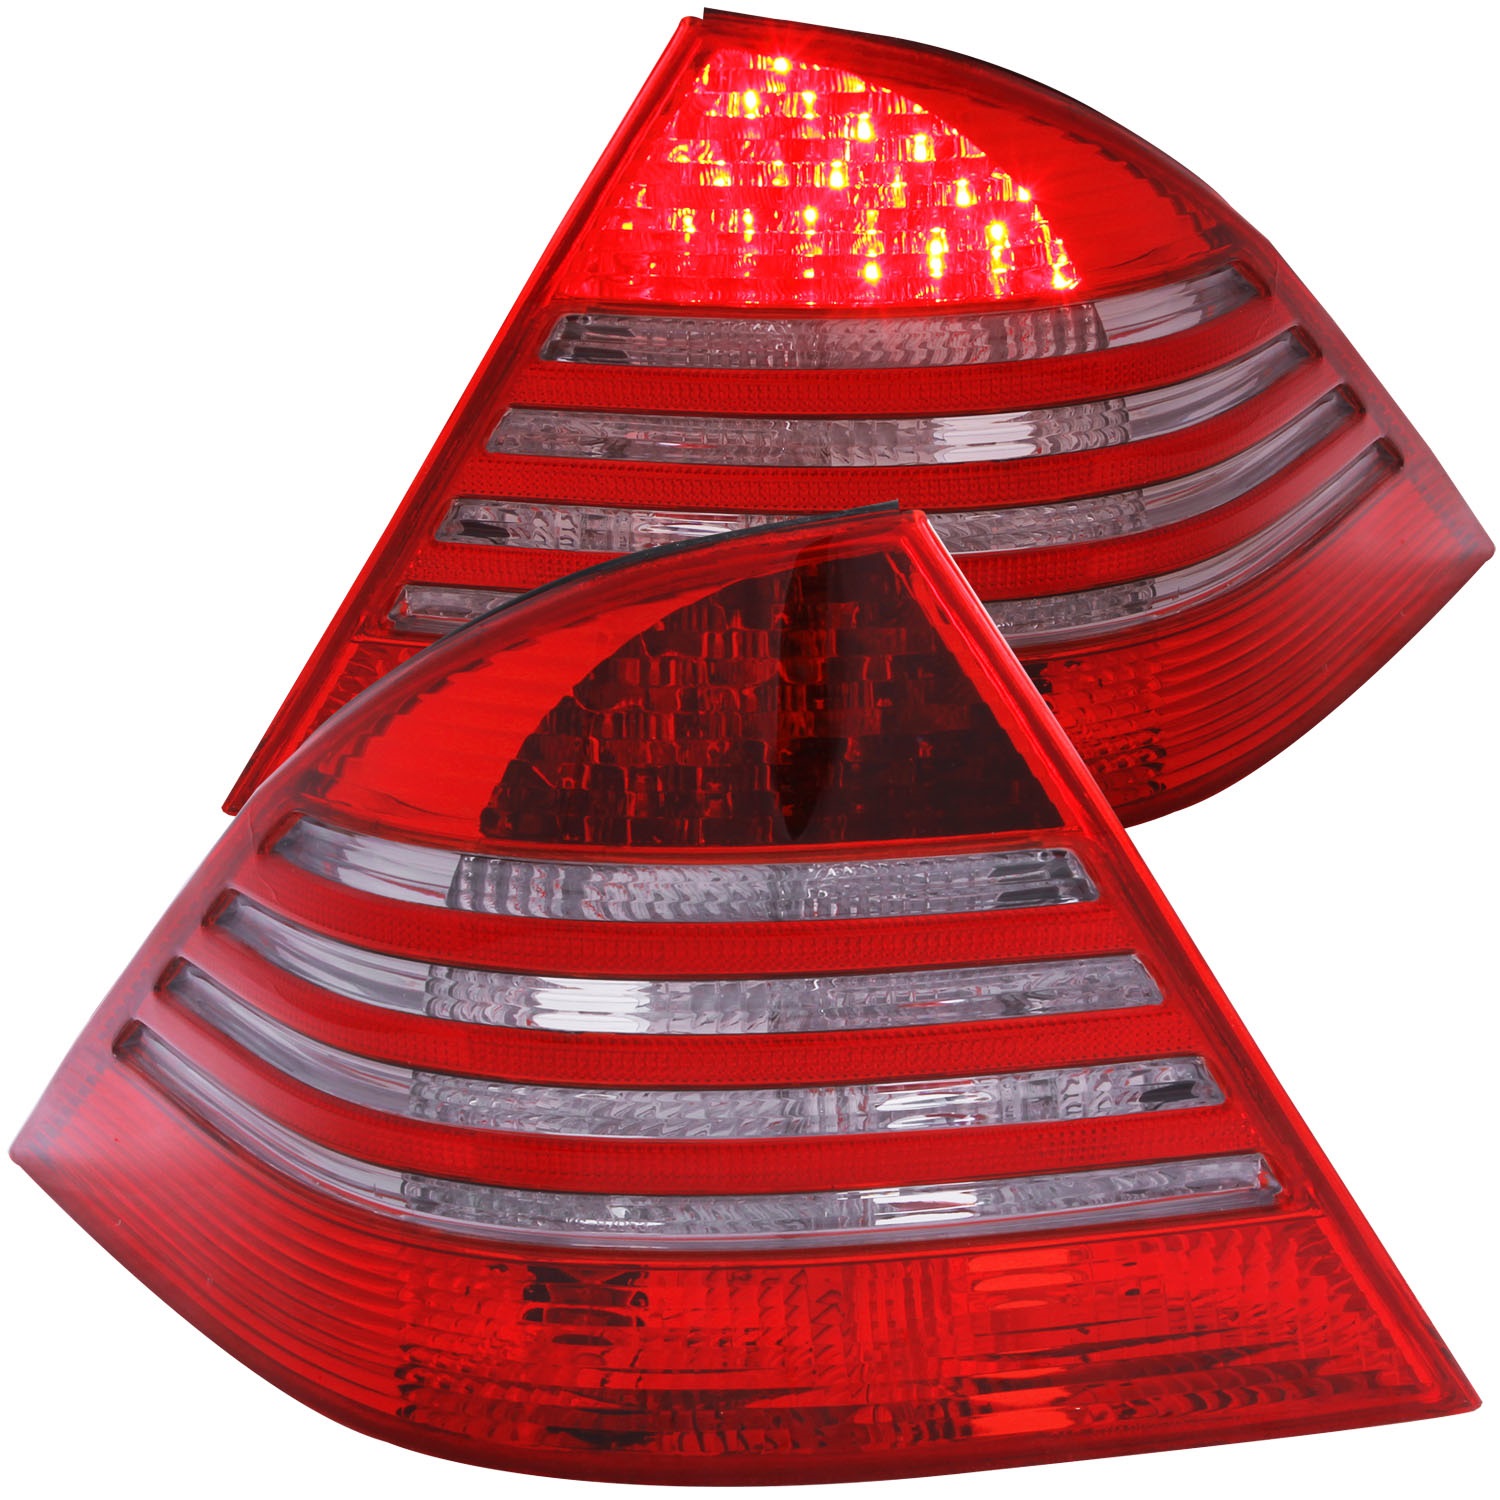 Anzo USA 321122 Tail Light Assembly Fits 00-05 S430 S500 S55 AMG S600